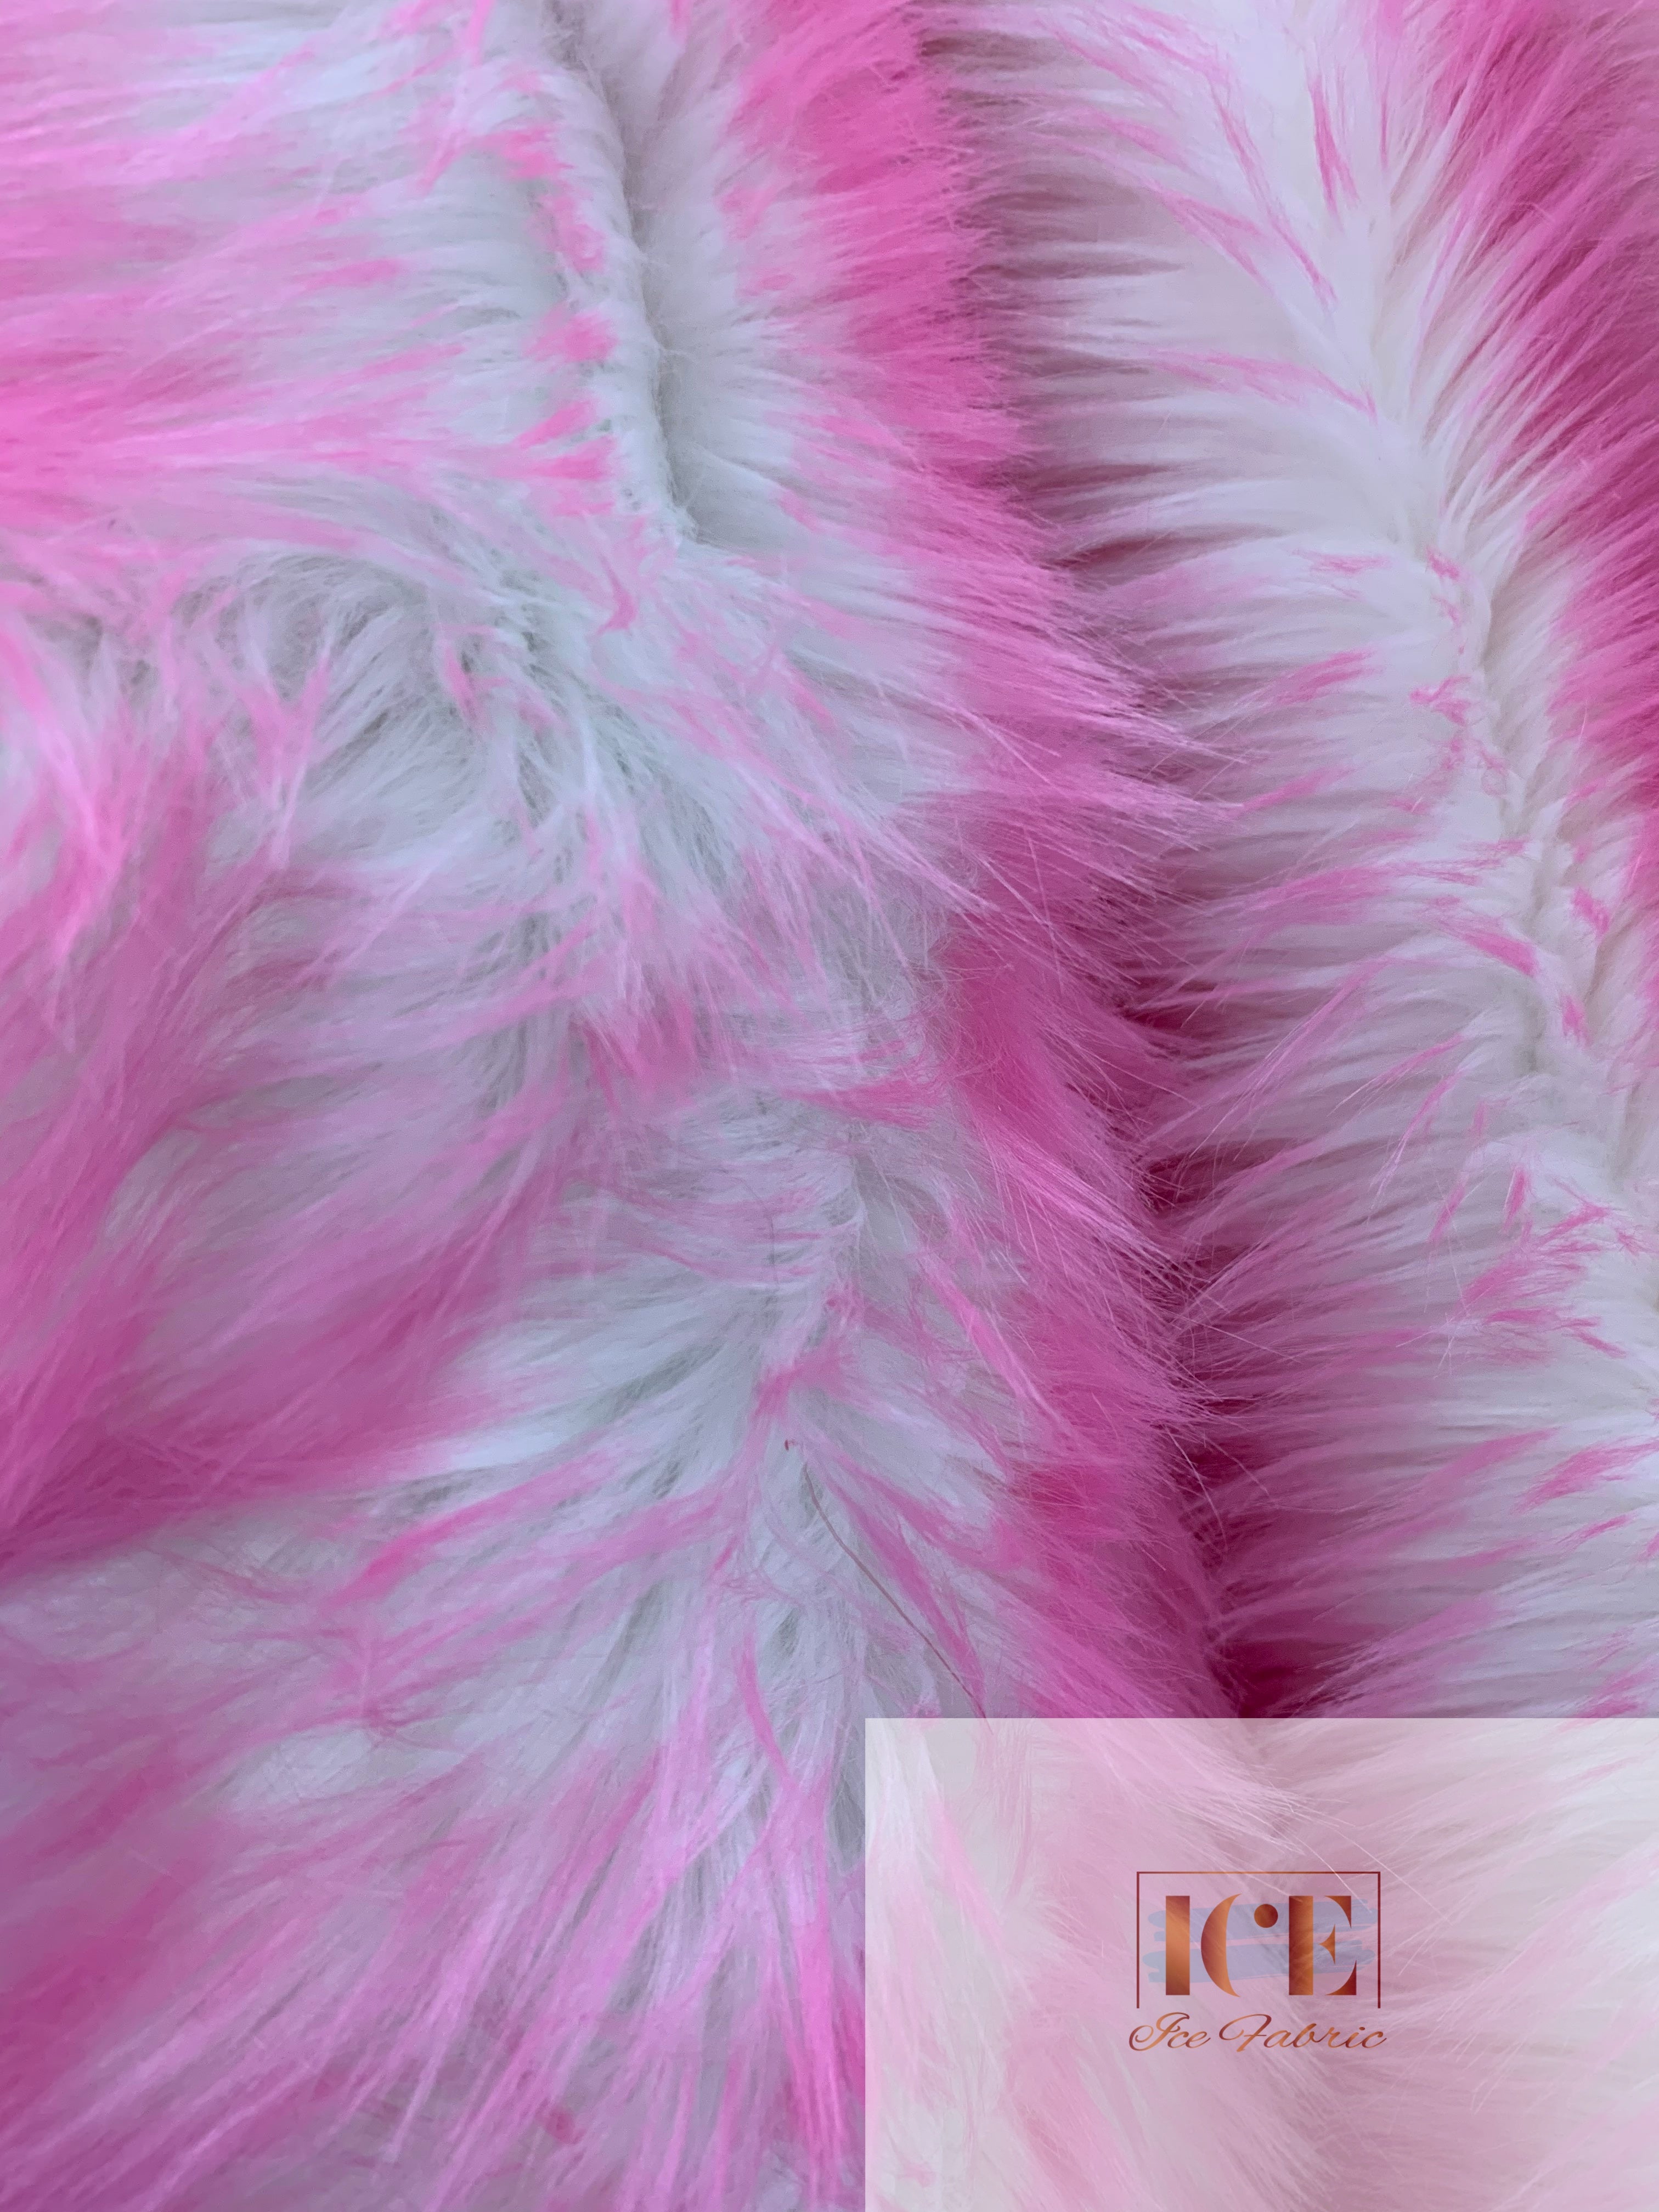 Canadian Fox 2 Tone Shaggy Long Pile Faux Fur Fabric For Blankets, Costumes, Bed SpreadICEFABRICICE FABRICSCandy PinkBy The Yard (60 inches Wide)Canadian Fox 2 Tone Shaggy Long Pile Faux Fur Fabric For Blankets, Costumes, Bed Spread ICEFABRIC Candy Pink